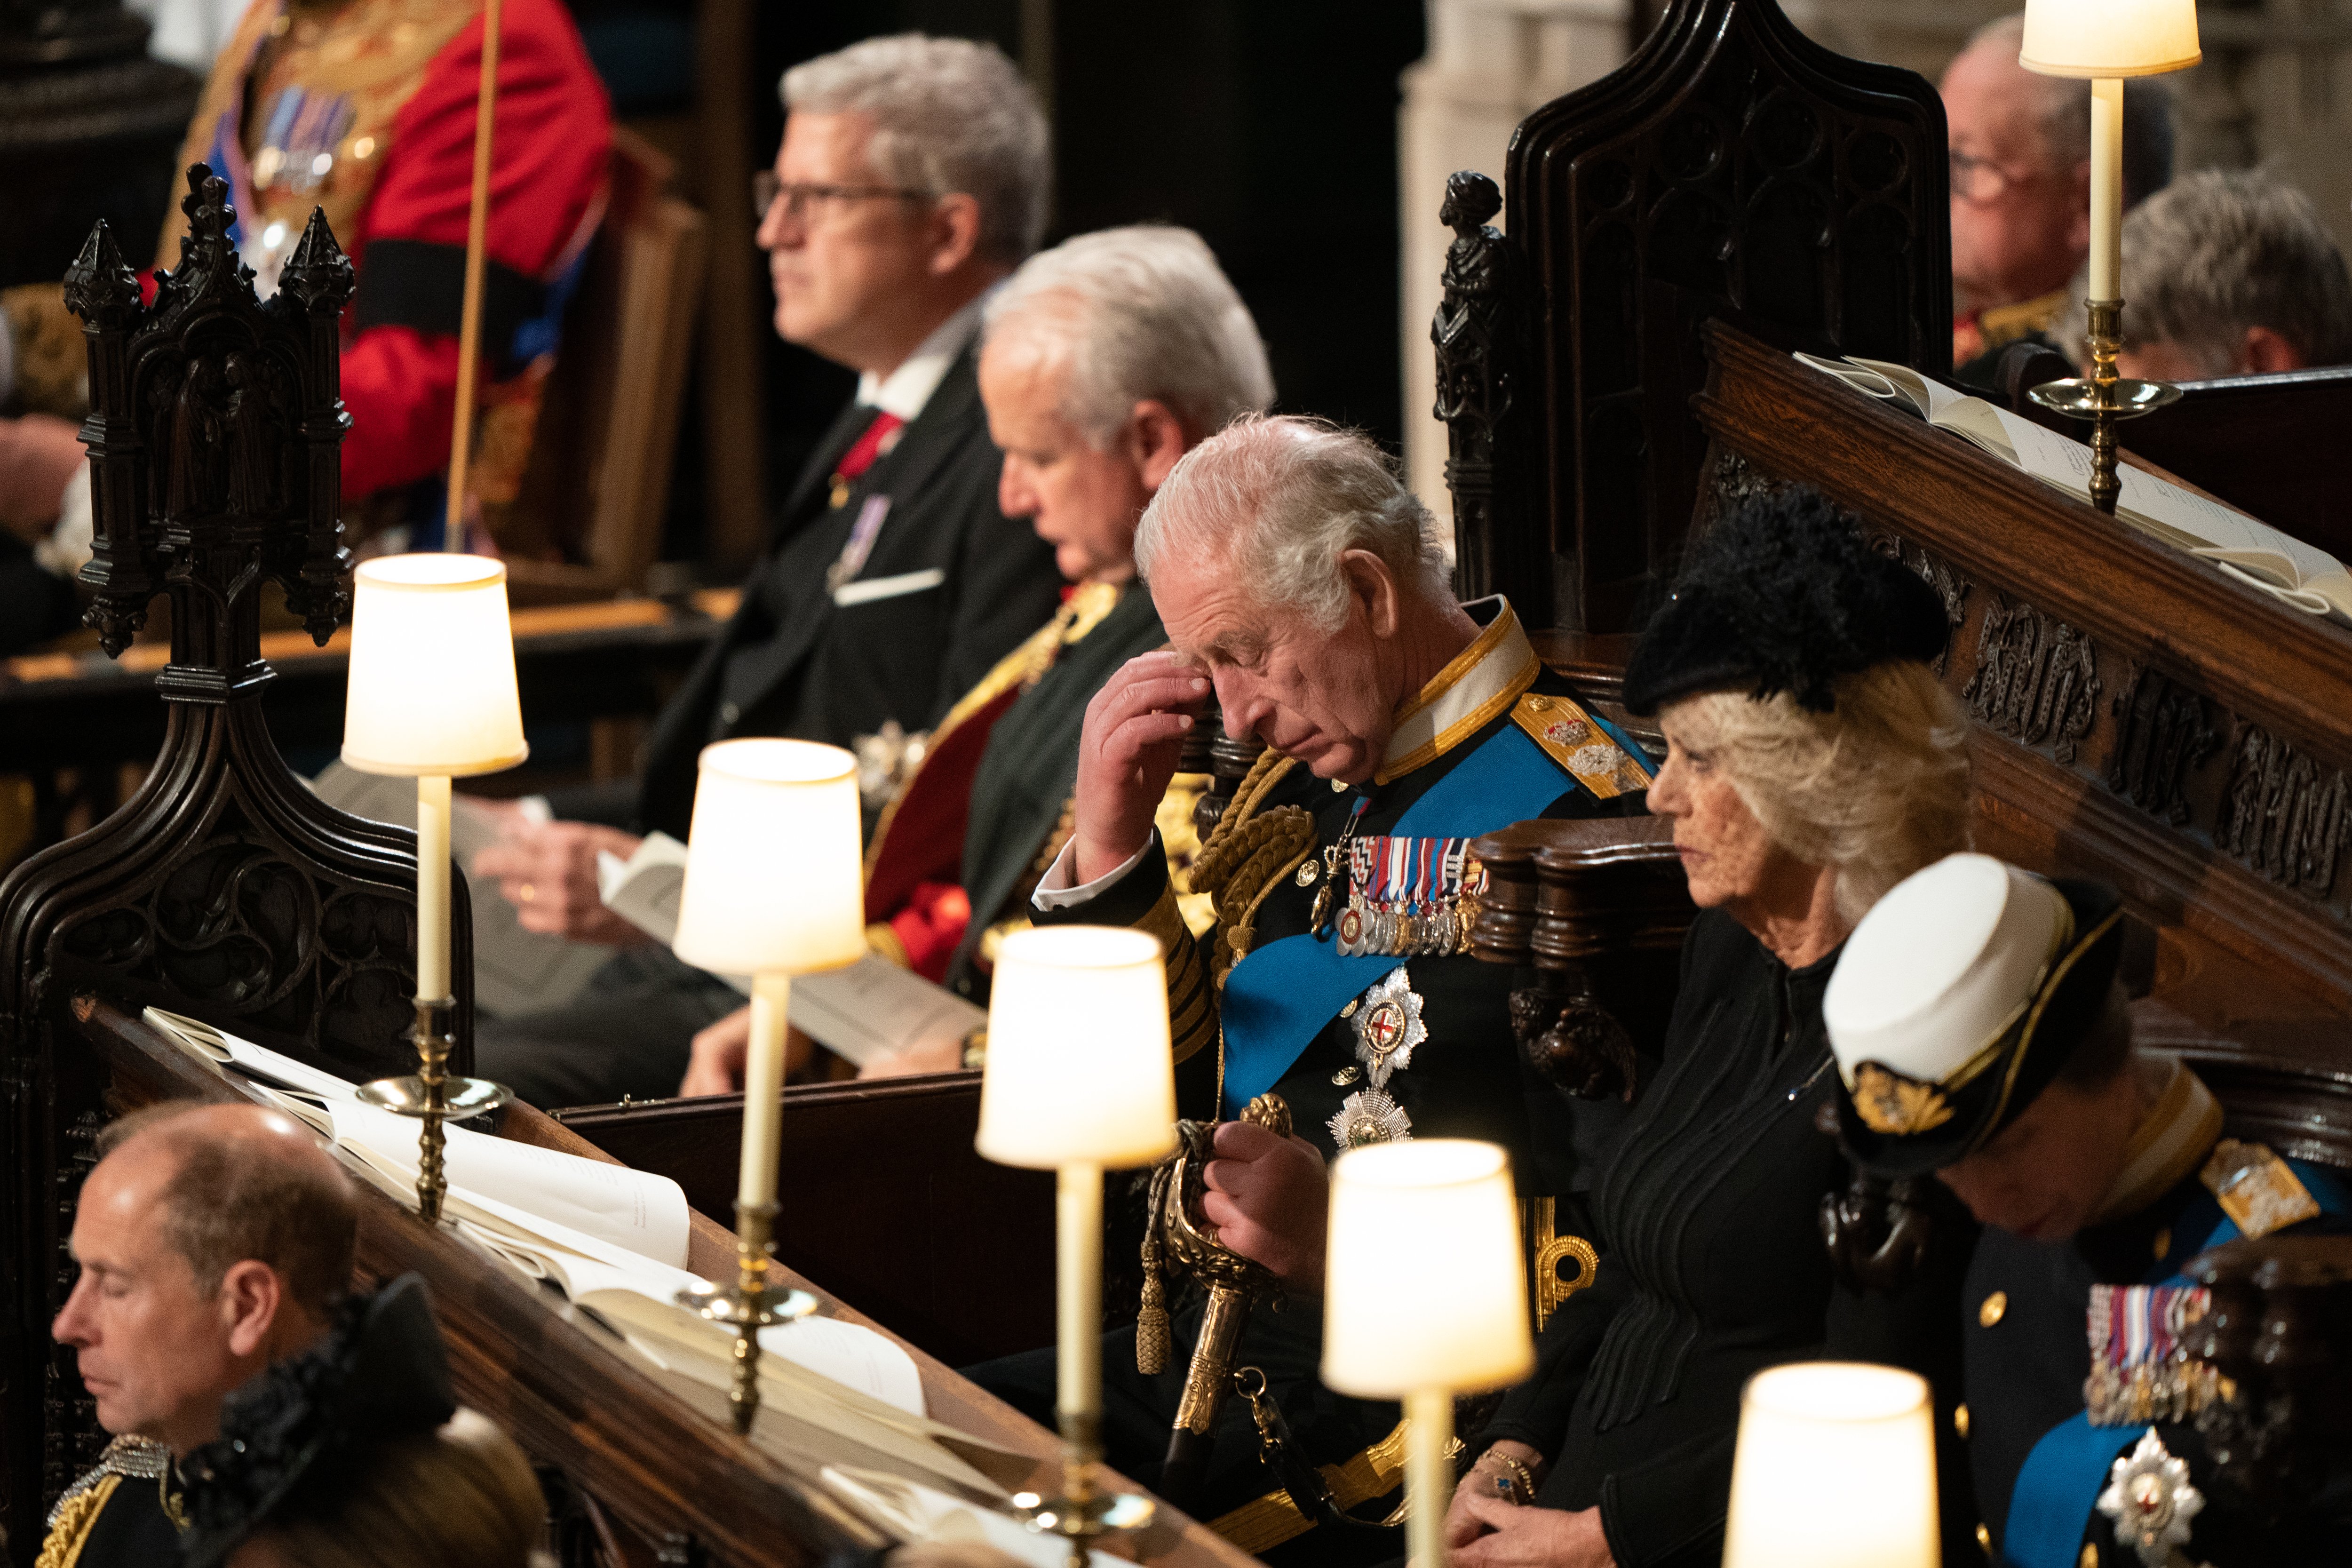 King Charles III during the Committal Service at St George's Chapel in Windsor Castle at St George's Chapel, Windsor Castle on September 19, 2022 in Windsor, England | Source: Getty Images